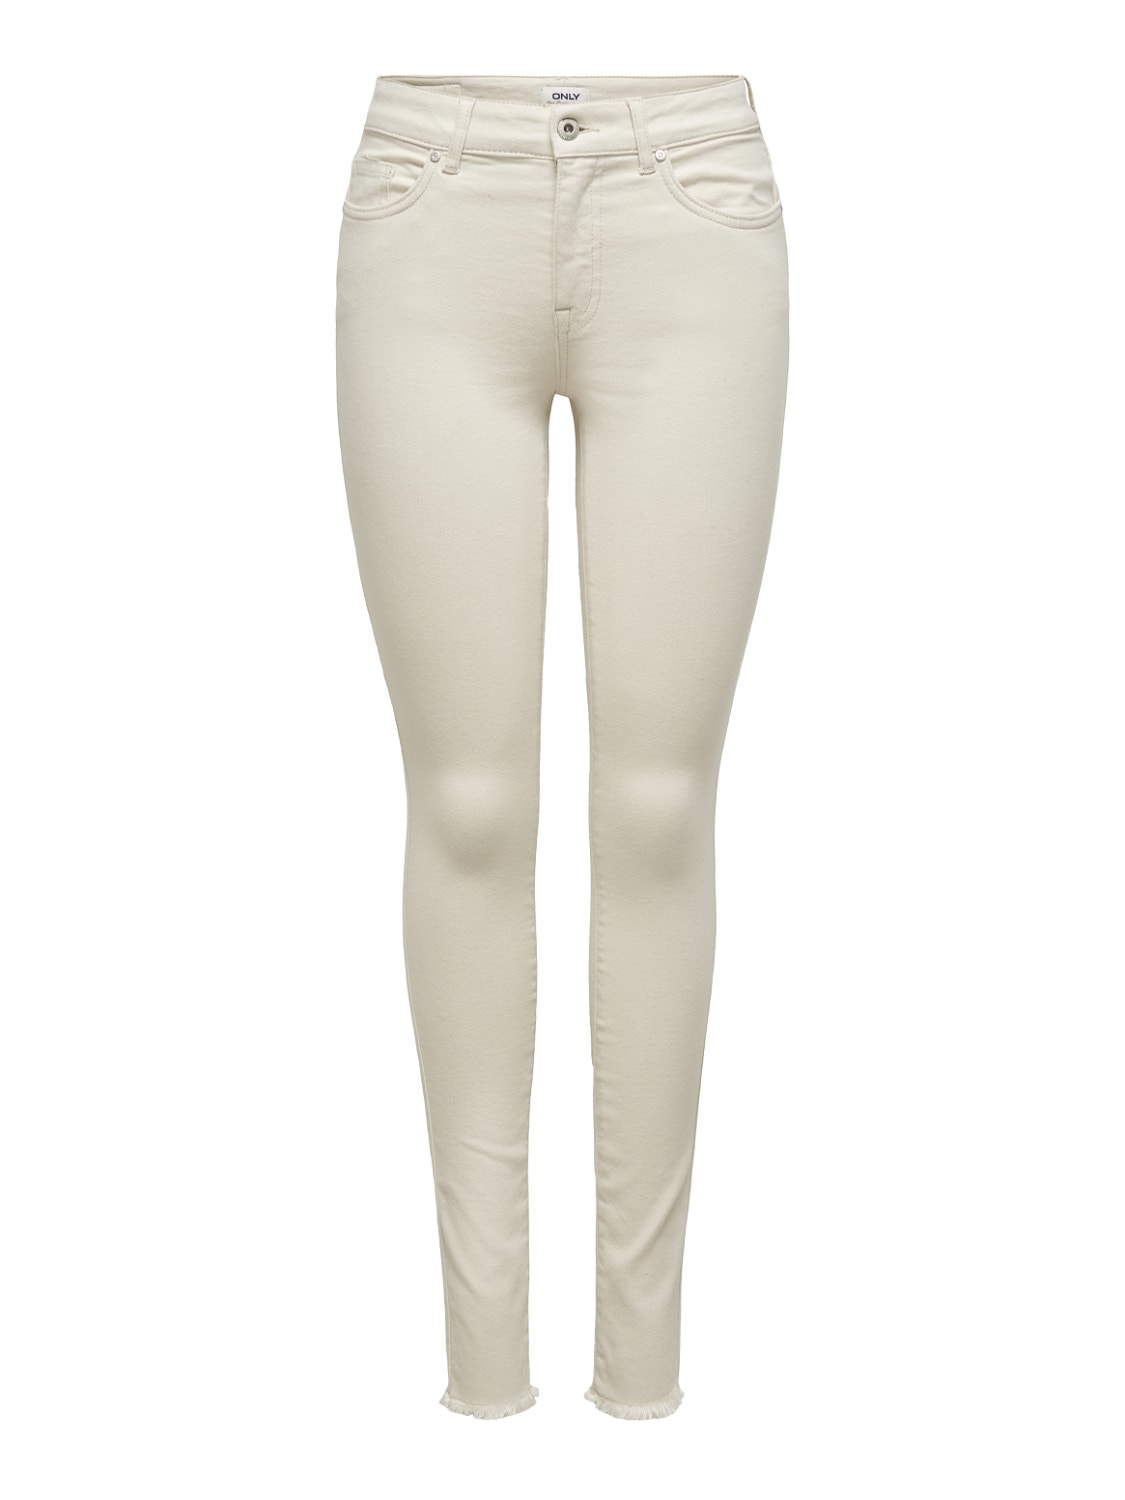 ONLY ONLBlushlife mid ankle Jeans skinny fit -Ecru - 15218655